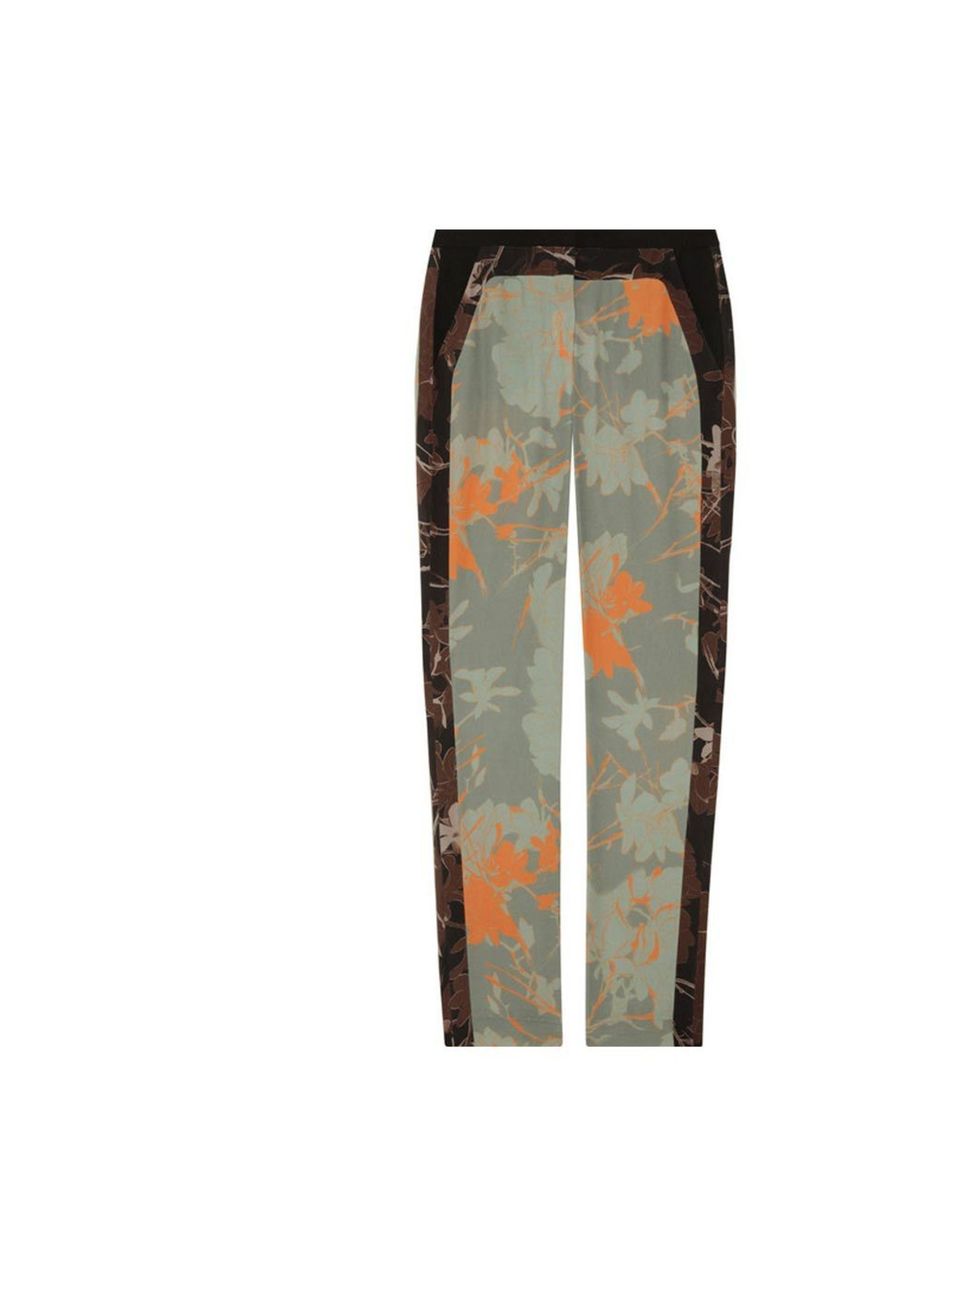 <p>A.L.C. printed trousers, £485, at <a href="http://www.net-a-porter.com/product/191187">Net-a-Porter</a></p>